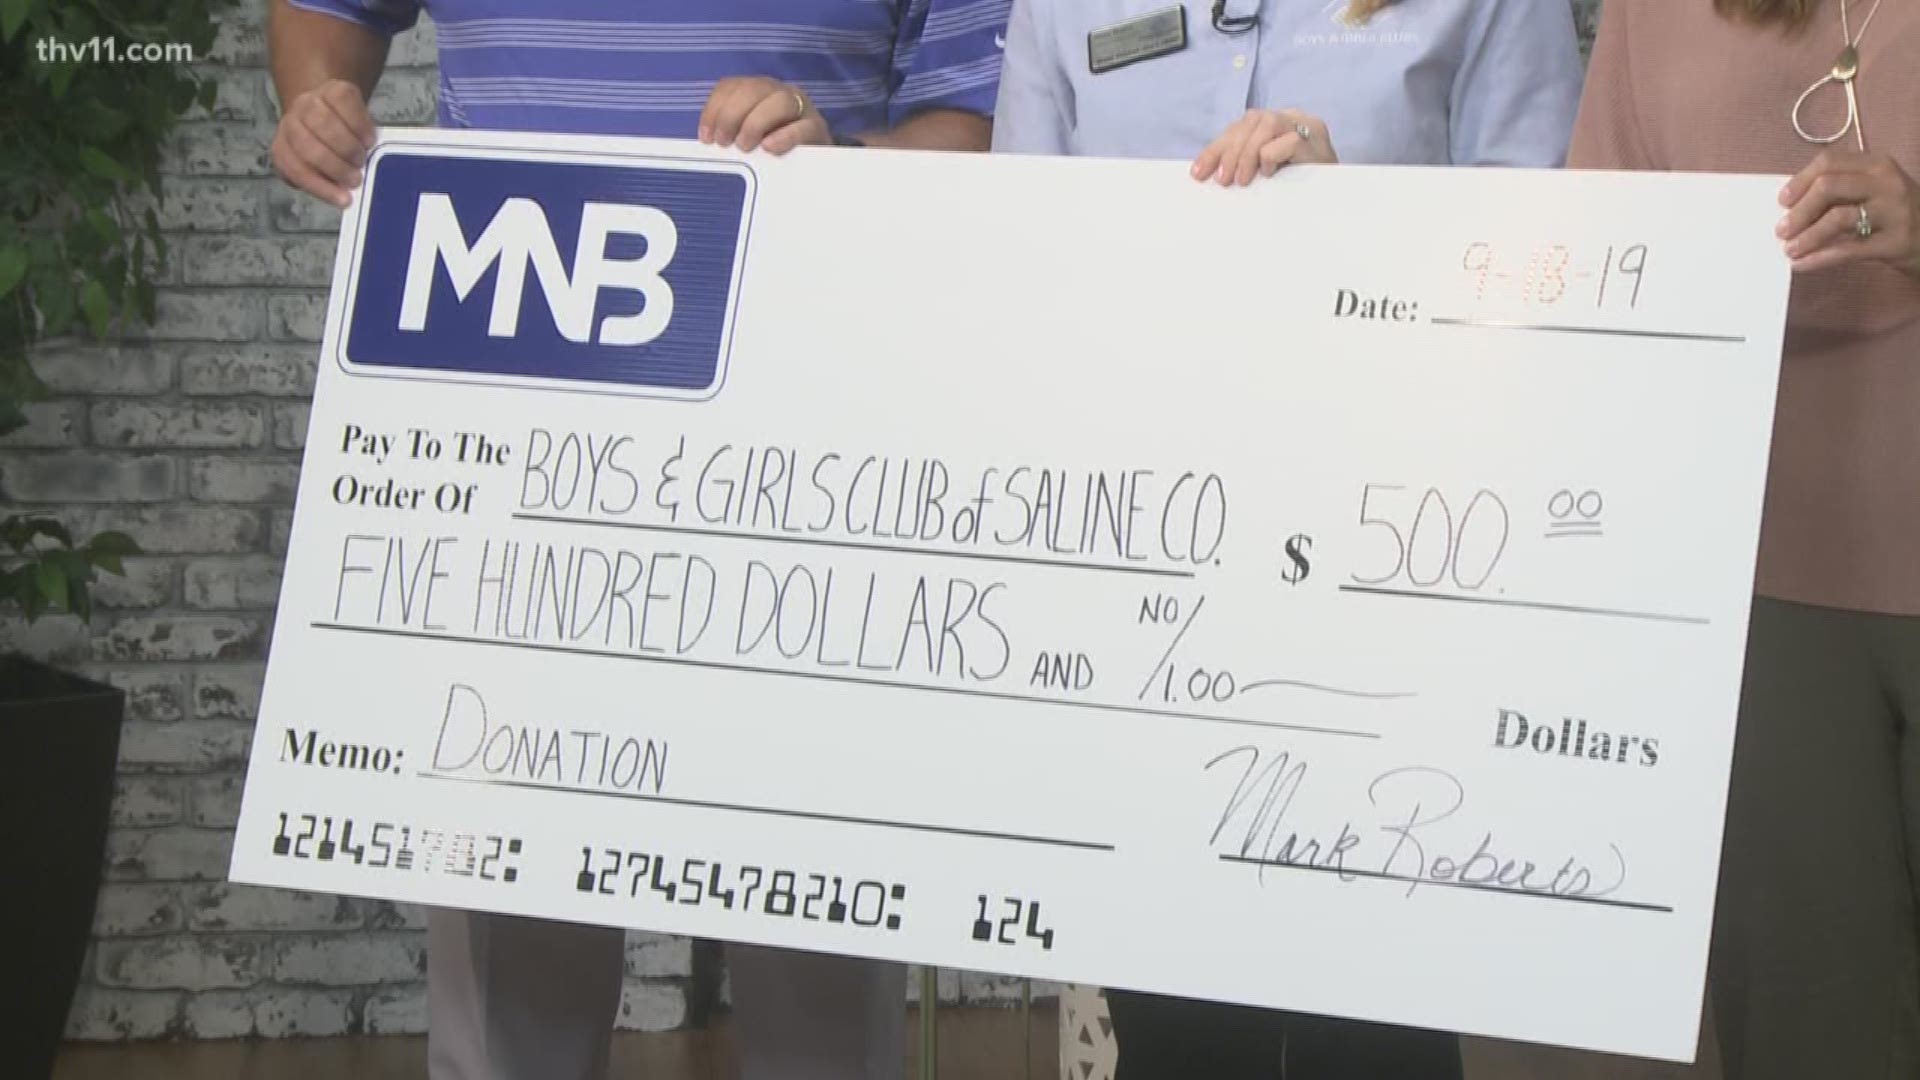 THV11 partnered with Road to a Better Community and MNB Bank to present the organization with a check. Boys and Girls Club of Saline County was recognized on Wednesday, September 18 with a $500 check.